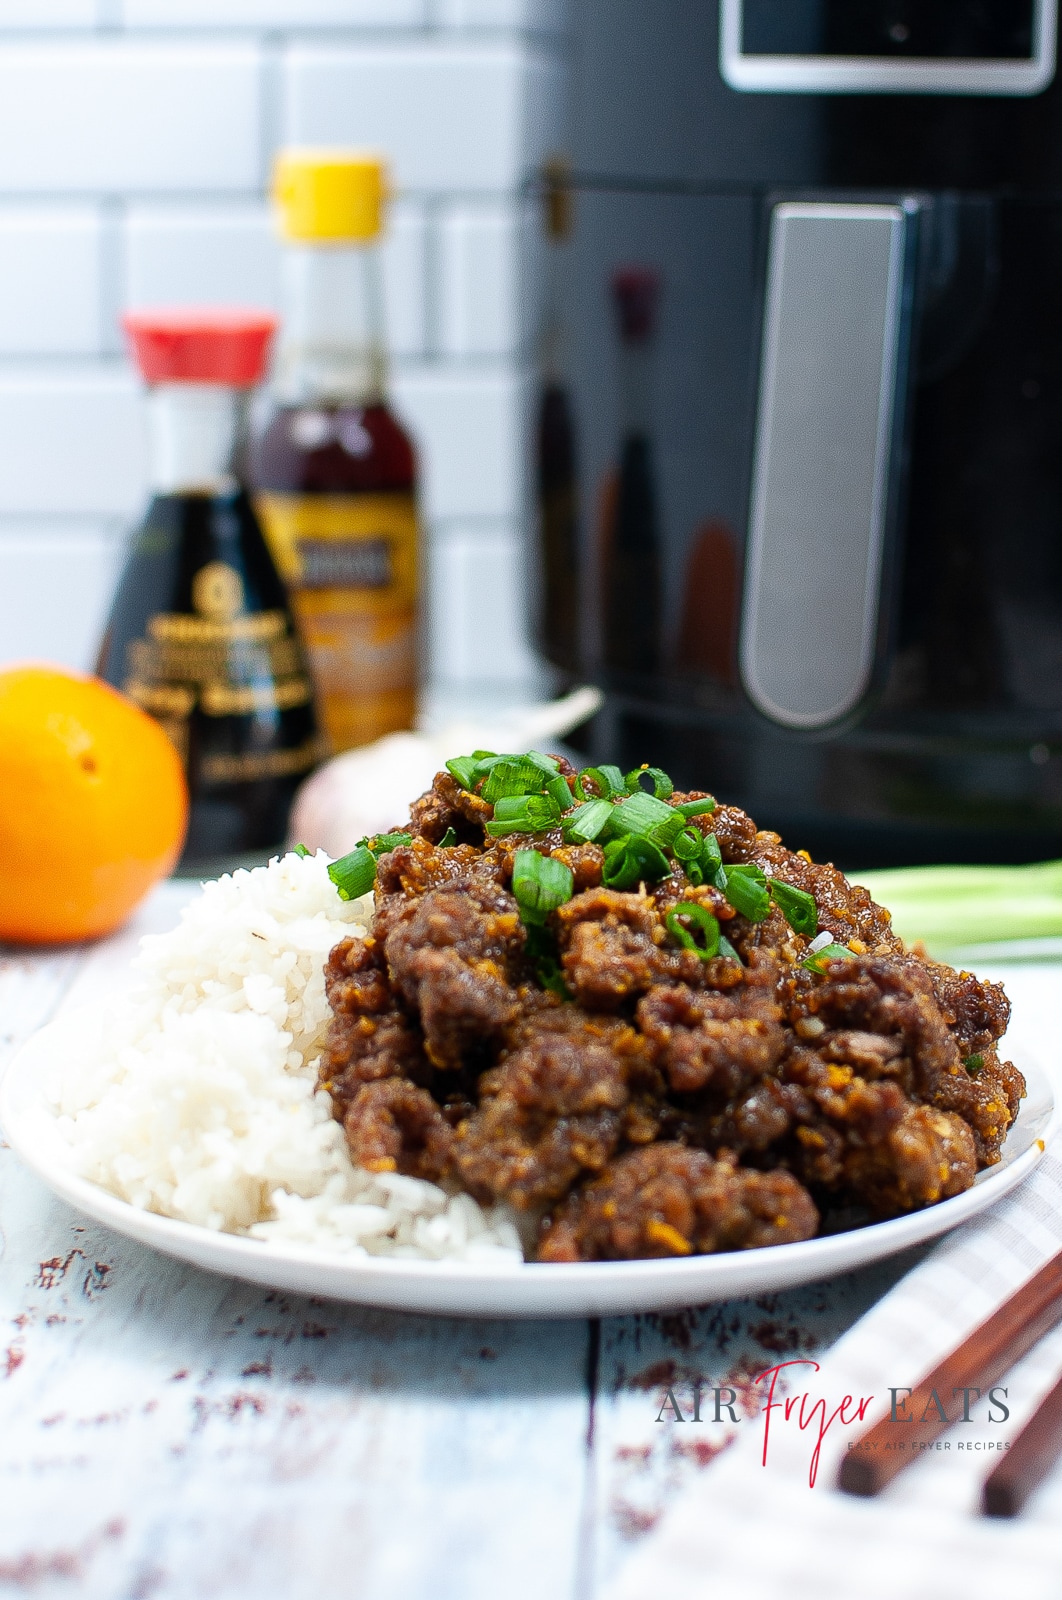 Vertical photo of a plate containing air fried orange beef & rice with green onions on top. In the bacground there is a black air fryer with silver handle. Also in the background are two bottled sauces and an orange.